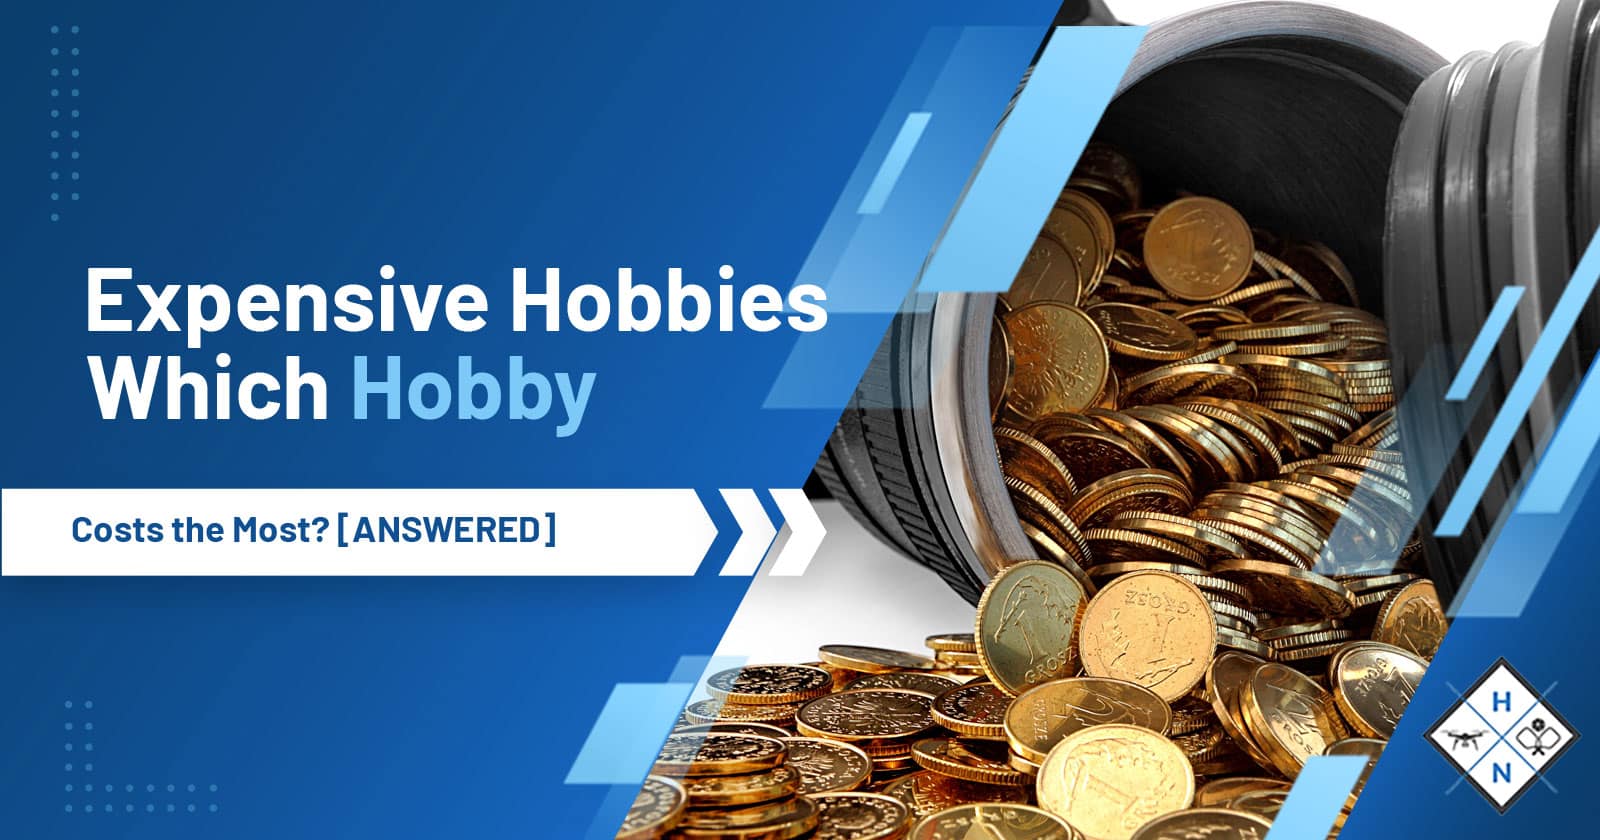 Expensive Hobbies &#8211; Which Hobby Costs the Most? [ANSWERED]